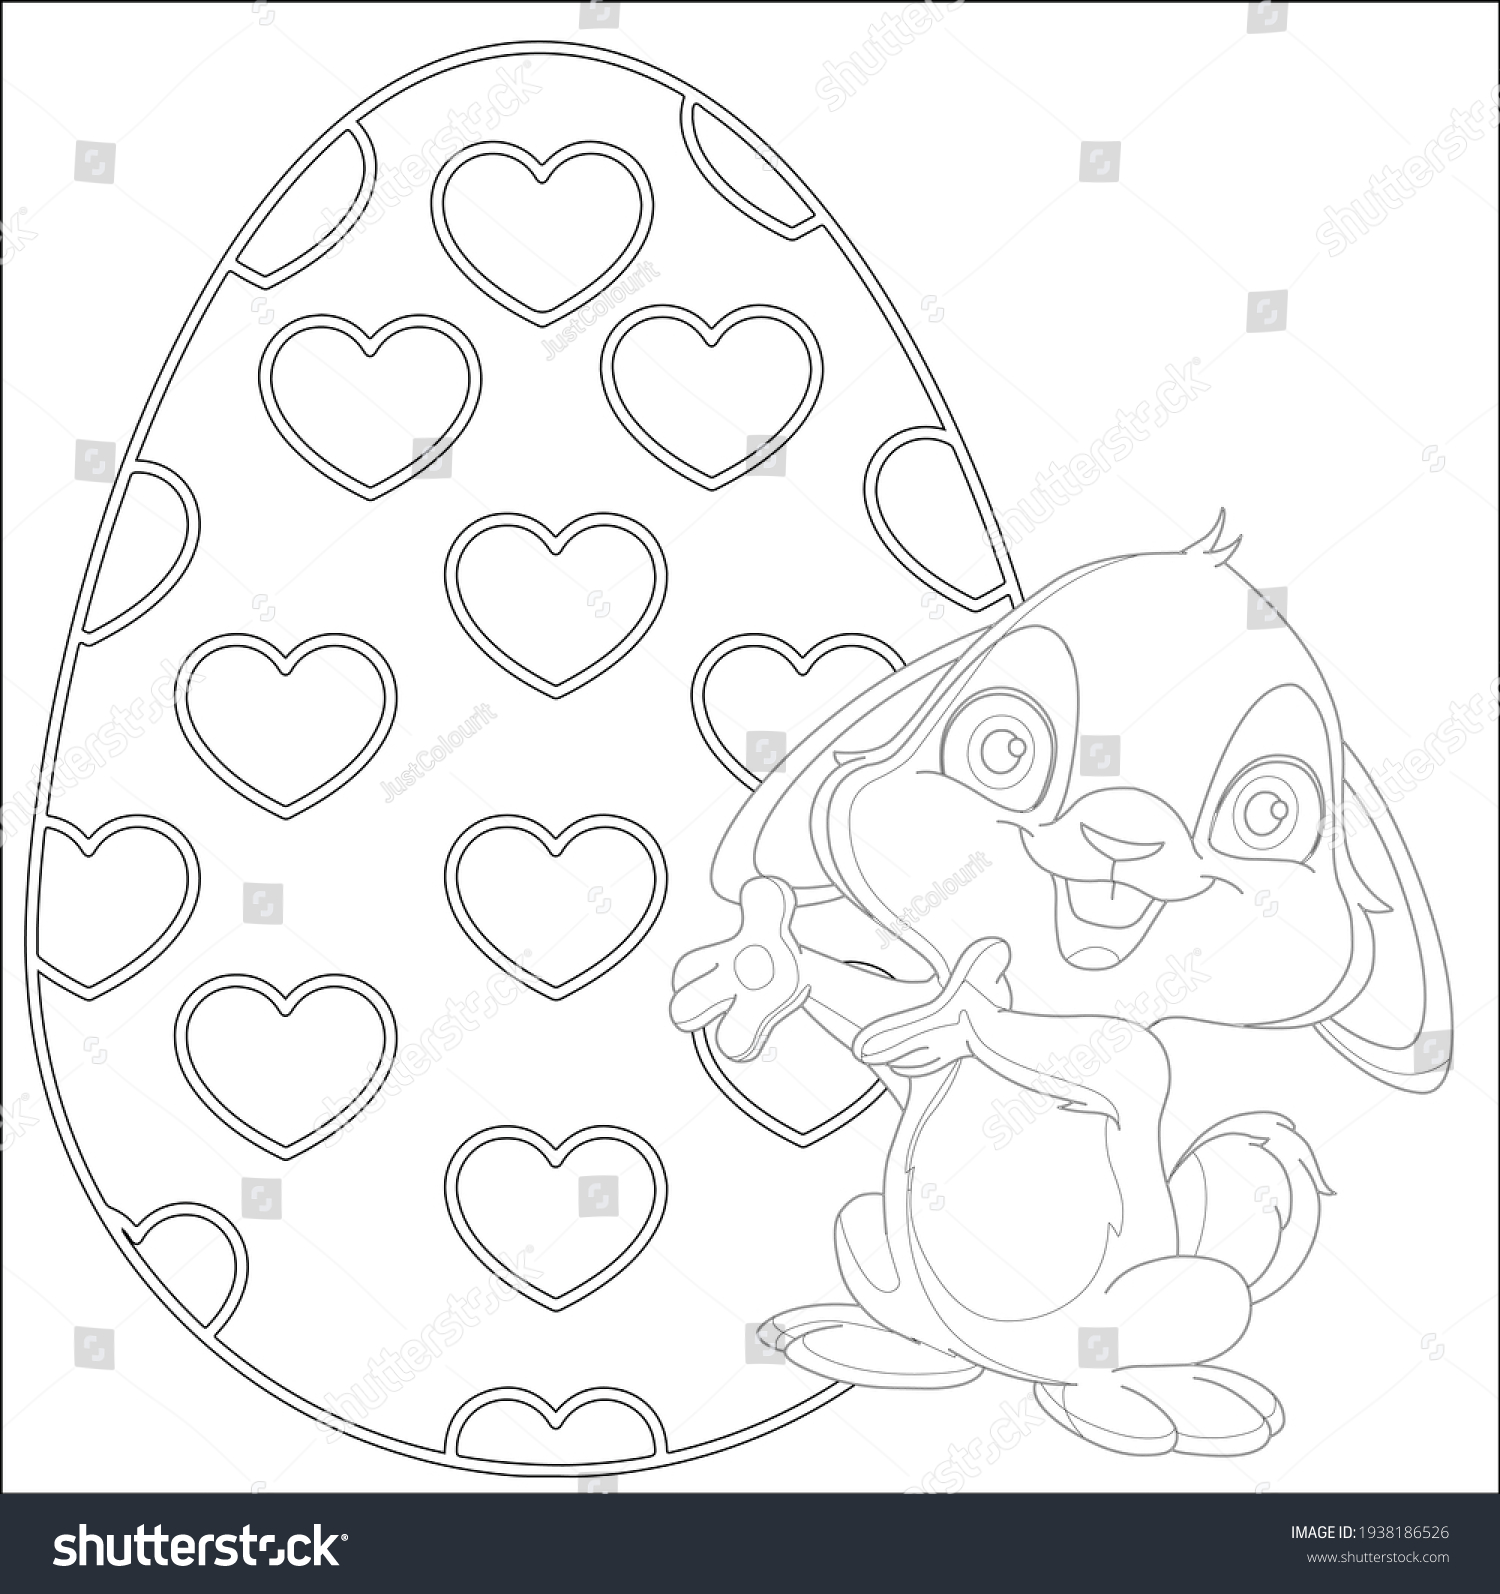 74 Coloring Pages Printable Bunny  Free